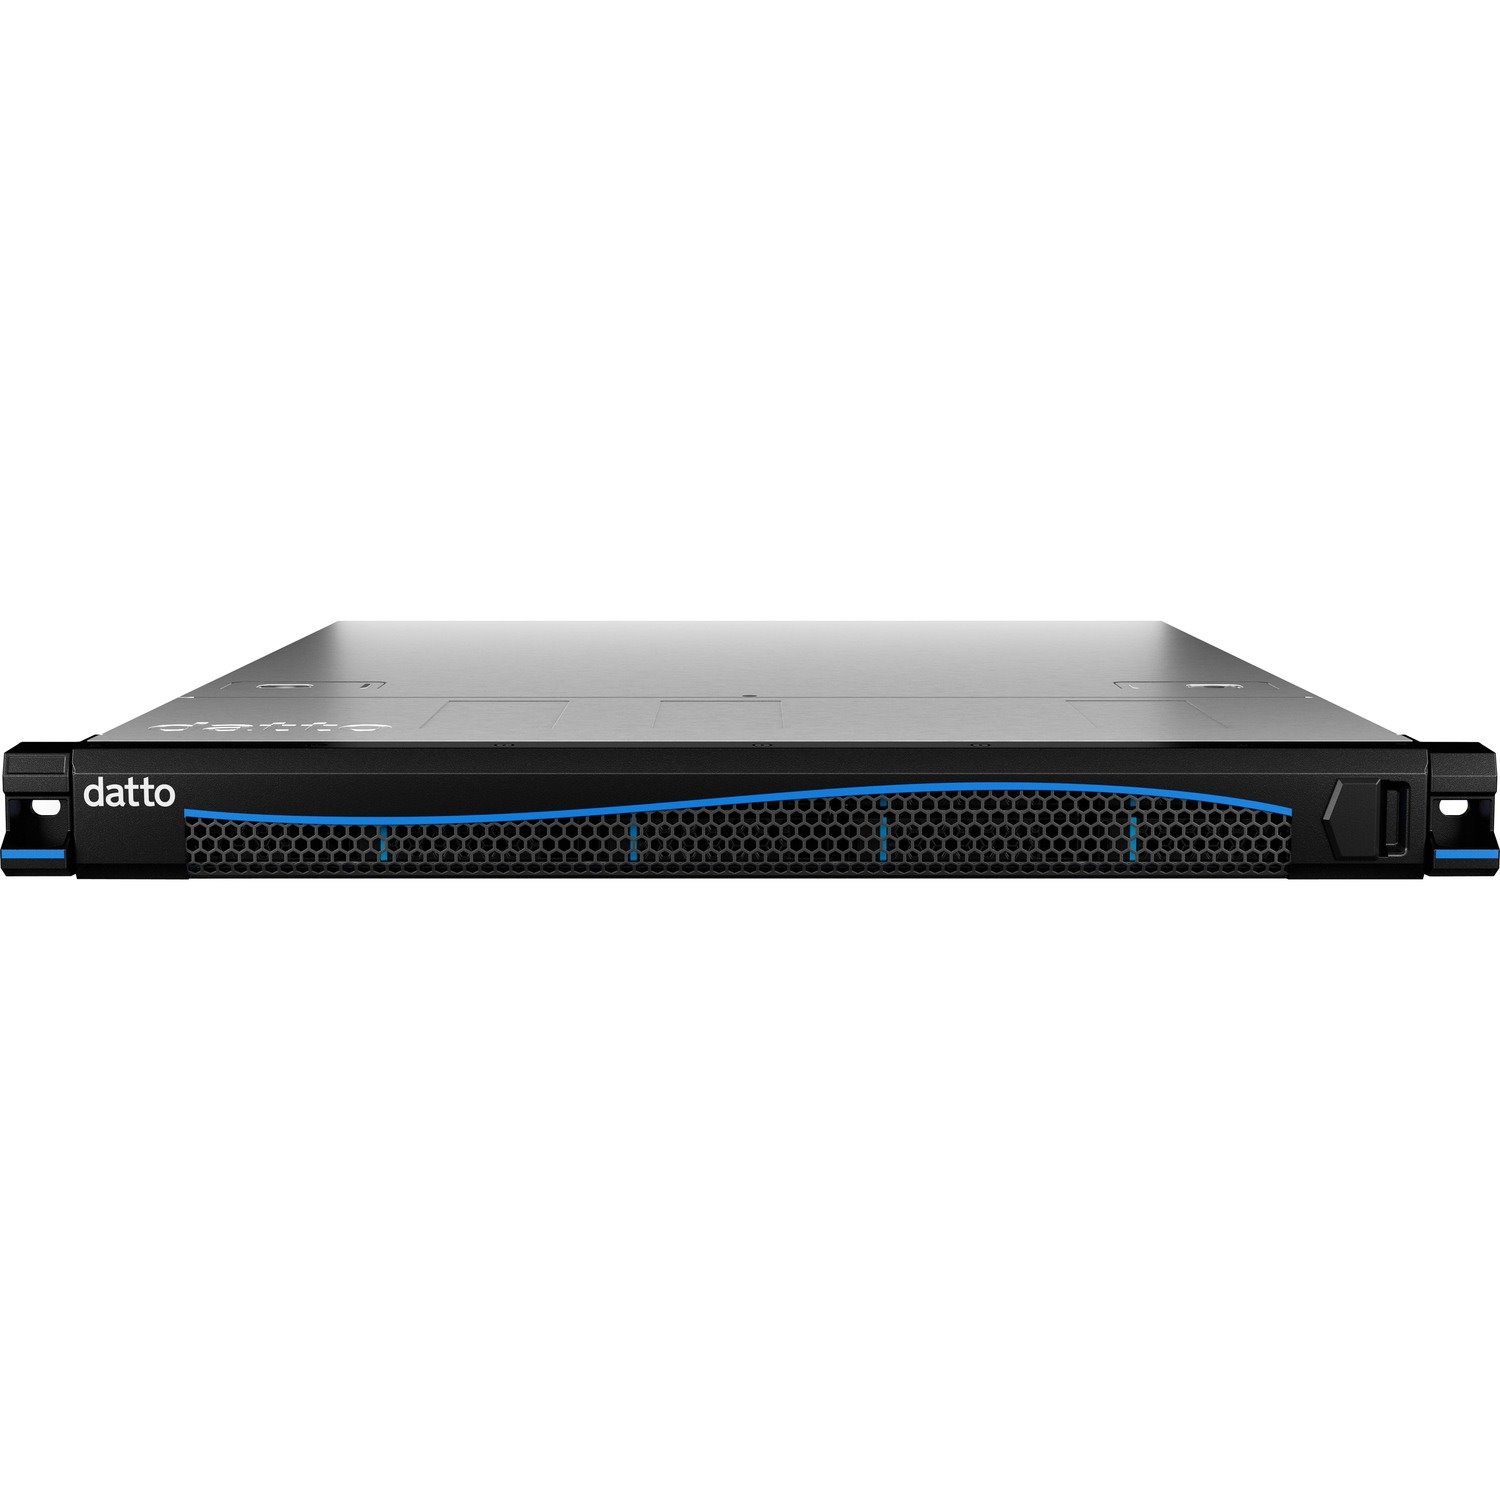 Datto Siris 4 XP 8TB Backup, Continuity & Disaster Recovery Appliance